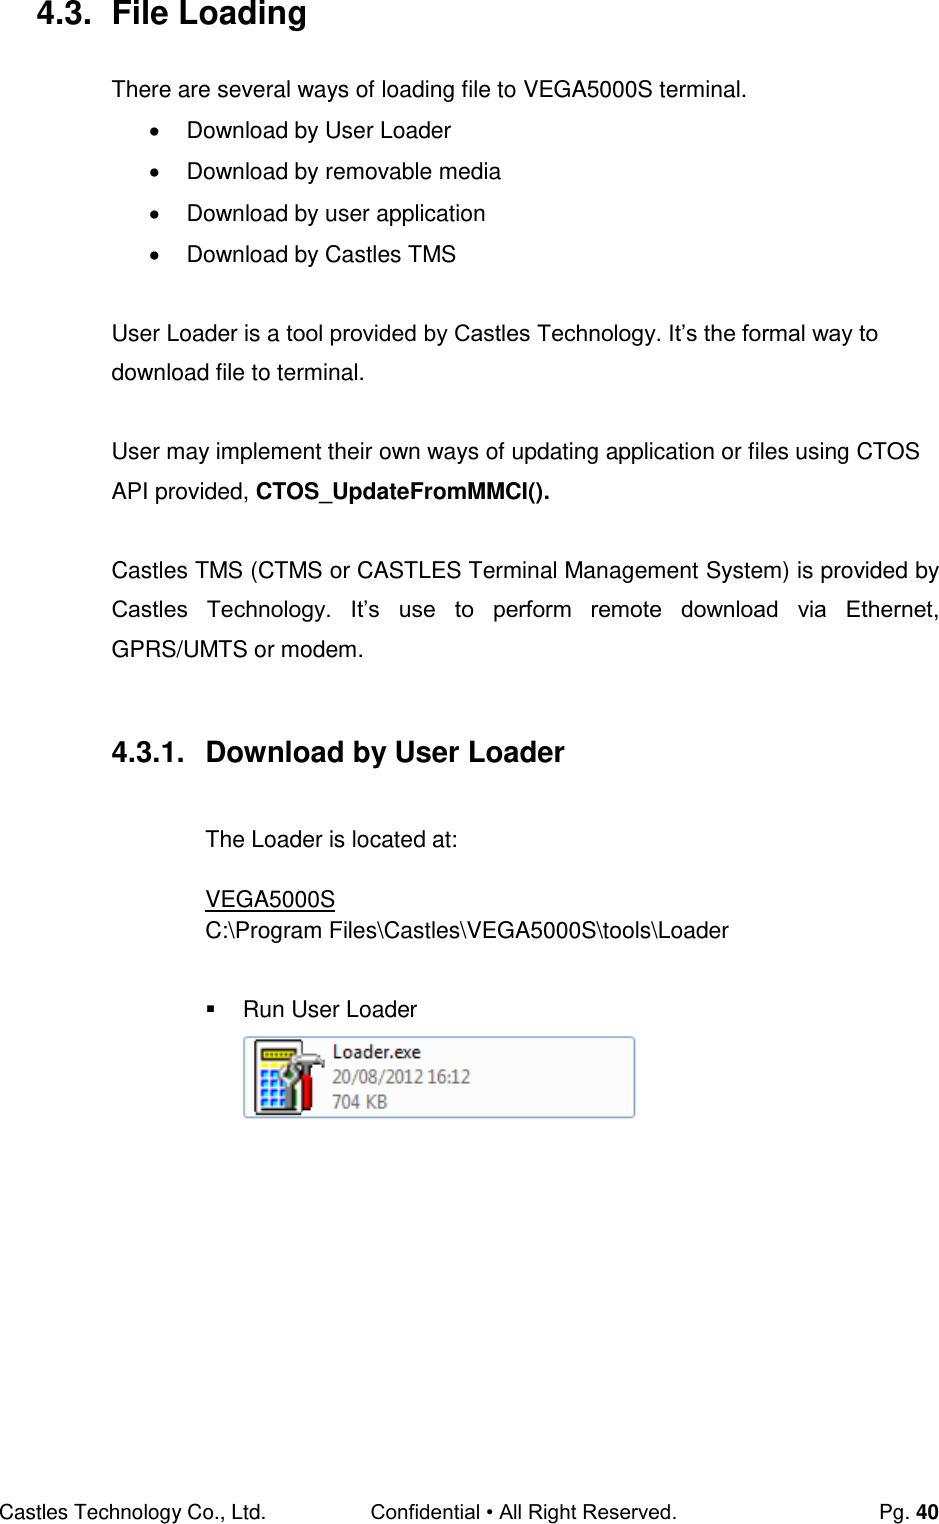 Castles Technology Co., Ltd. Confidential • All Right Reserved.  Pg. 40 4.3.  File Loading There are several ways of loading file to VEGA5000S terminal.    Download by User Loader   Download by removable media   Download by user application   Download by Castles TMS  User Loader is a tool provided by Castles Technology. It’s the formal way to download file to terminal.  User may implement their own ways of updating application or files using CTOS API provided, CTOS_UpdateFromMMCI().  Castles TMS (CTMS or CASTLES Terminal Management System) is provided by Castles  Technology.  It’s  use  to  perform  remote  download  via  Ethernet,  GPRS/UMTS or modem.  4.3.1.  Download by User Loader  The Loader is located at:  VEGA5000S C:\Program Files\Castles\VEGA5000S\tools\Loader    Run User Loader        